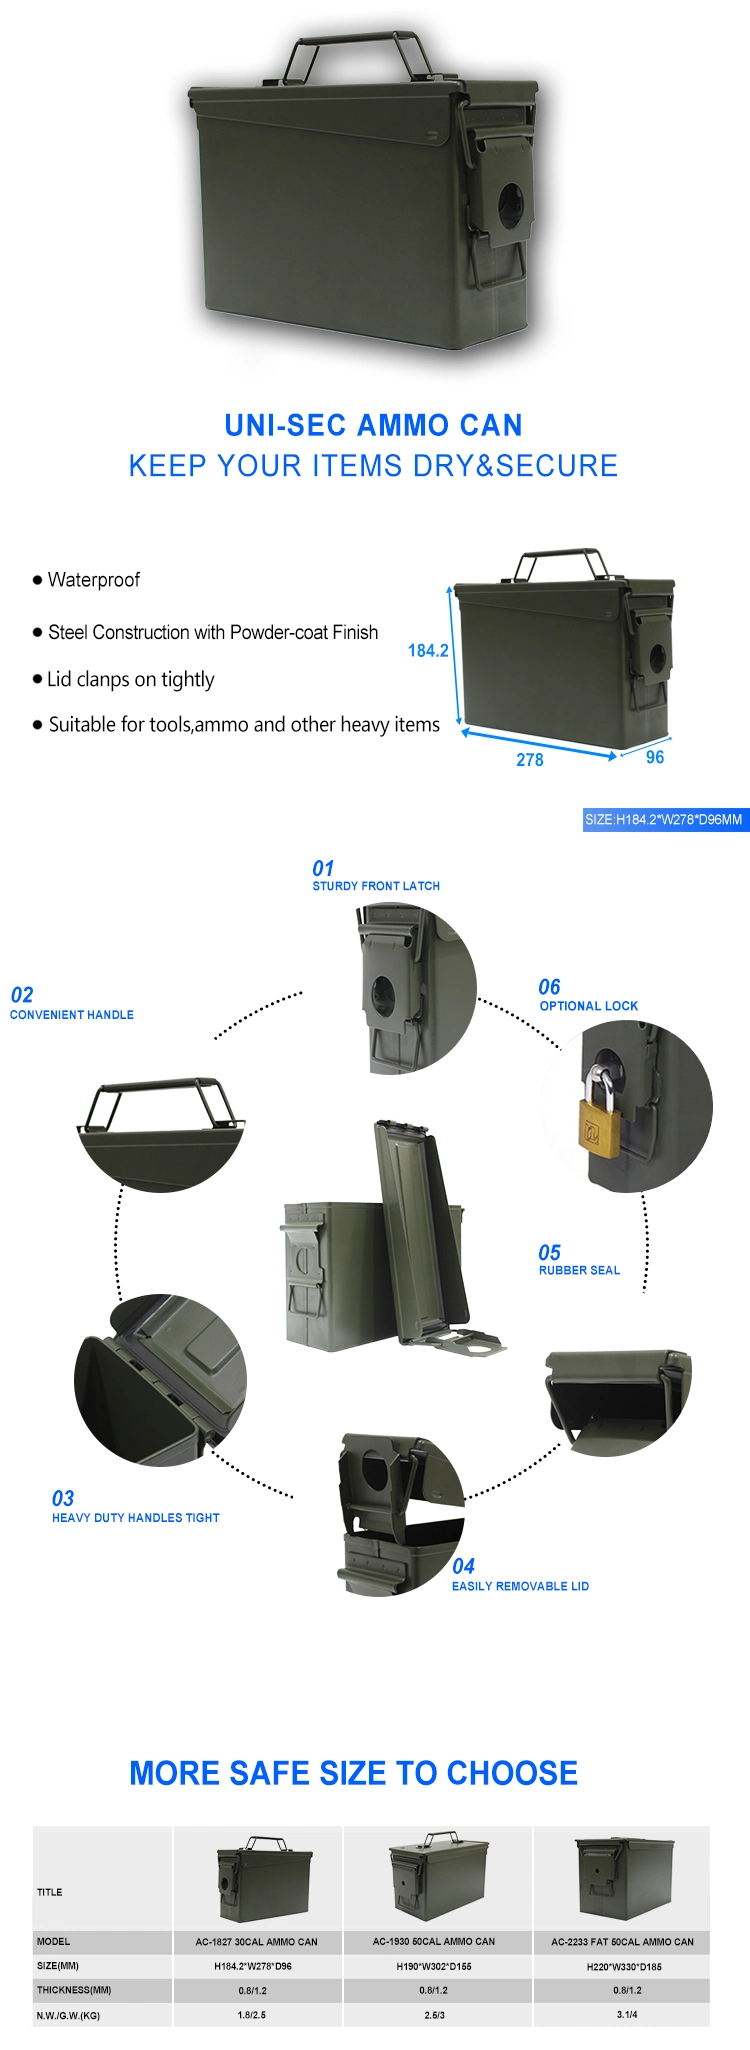 China Manufacturer Customized Security Electronic Strong Support Digital Home Ammo Can Factory Price Wholesale (AC-1930)